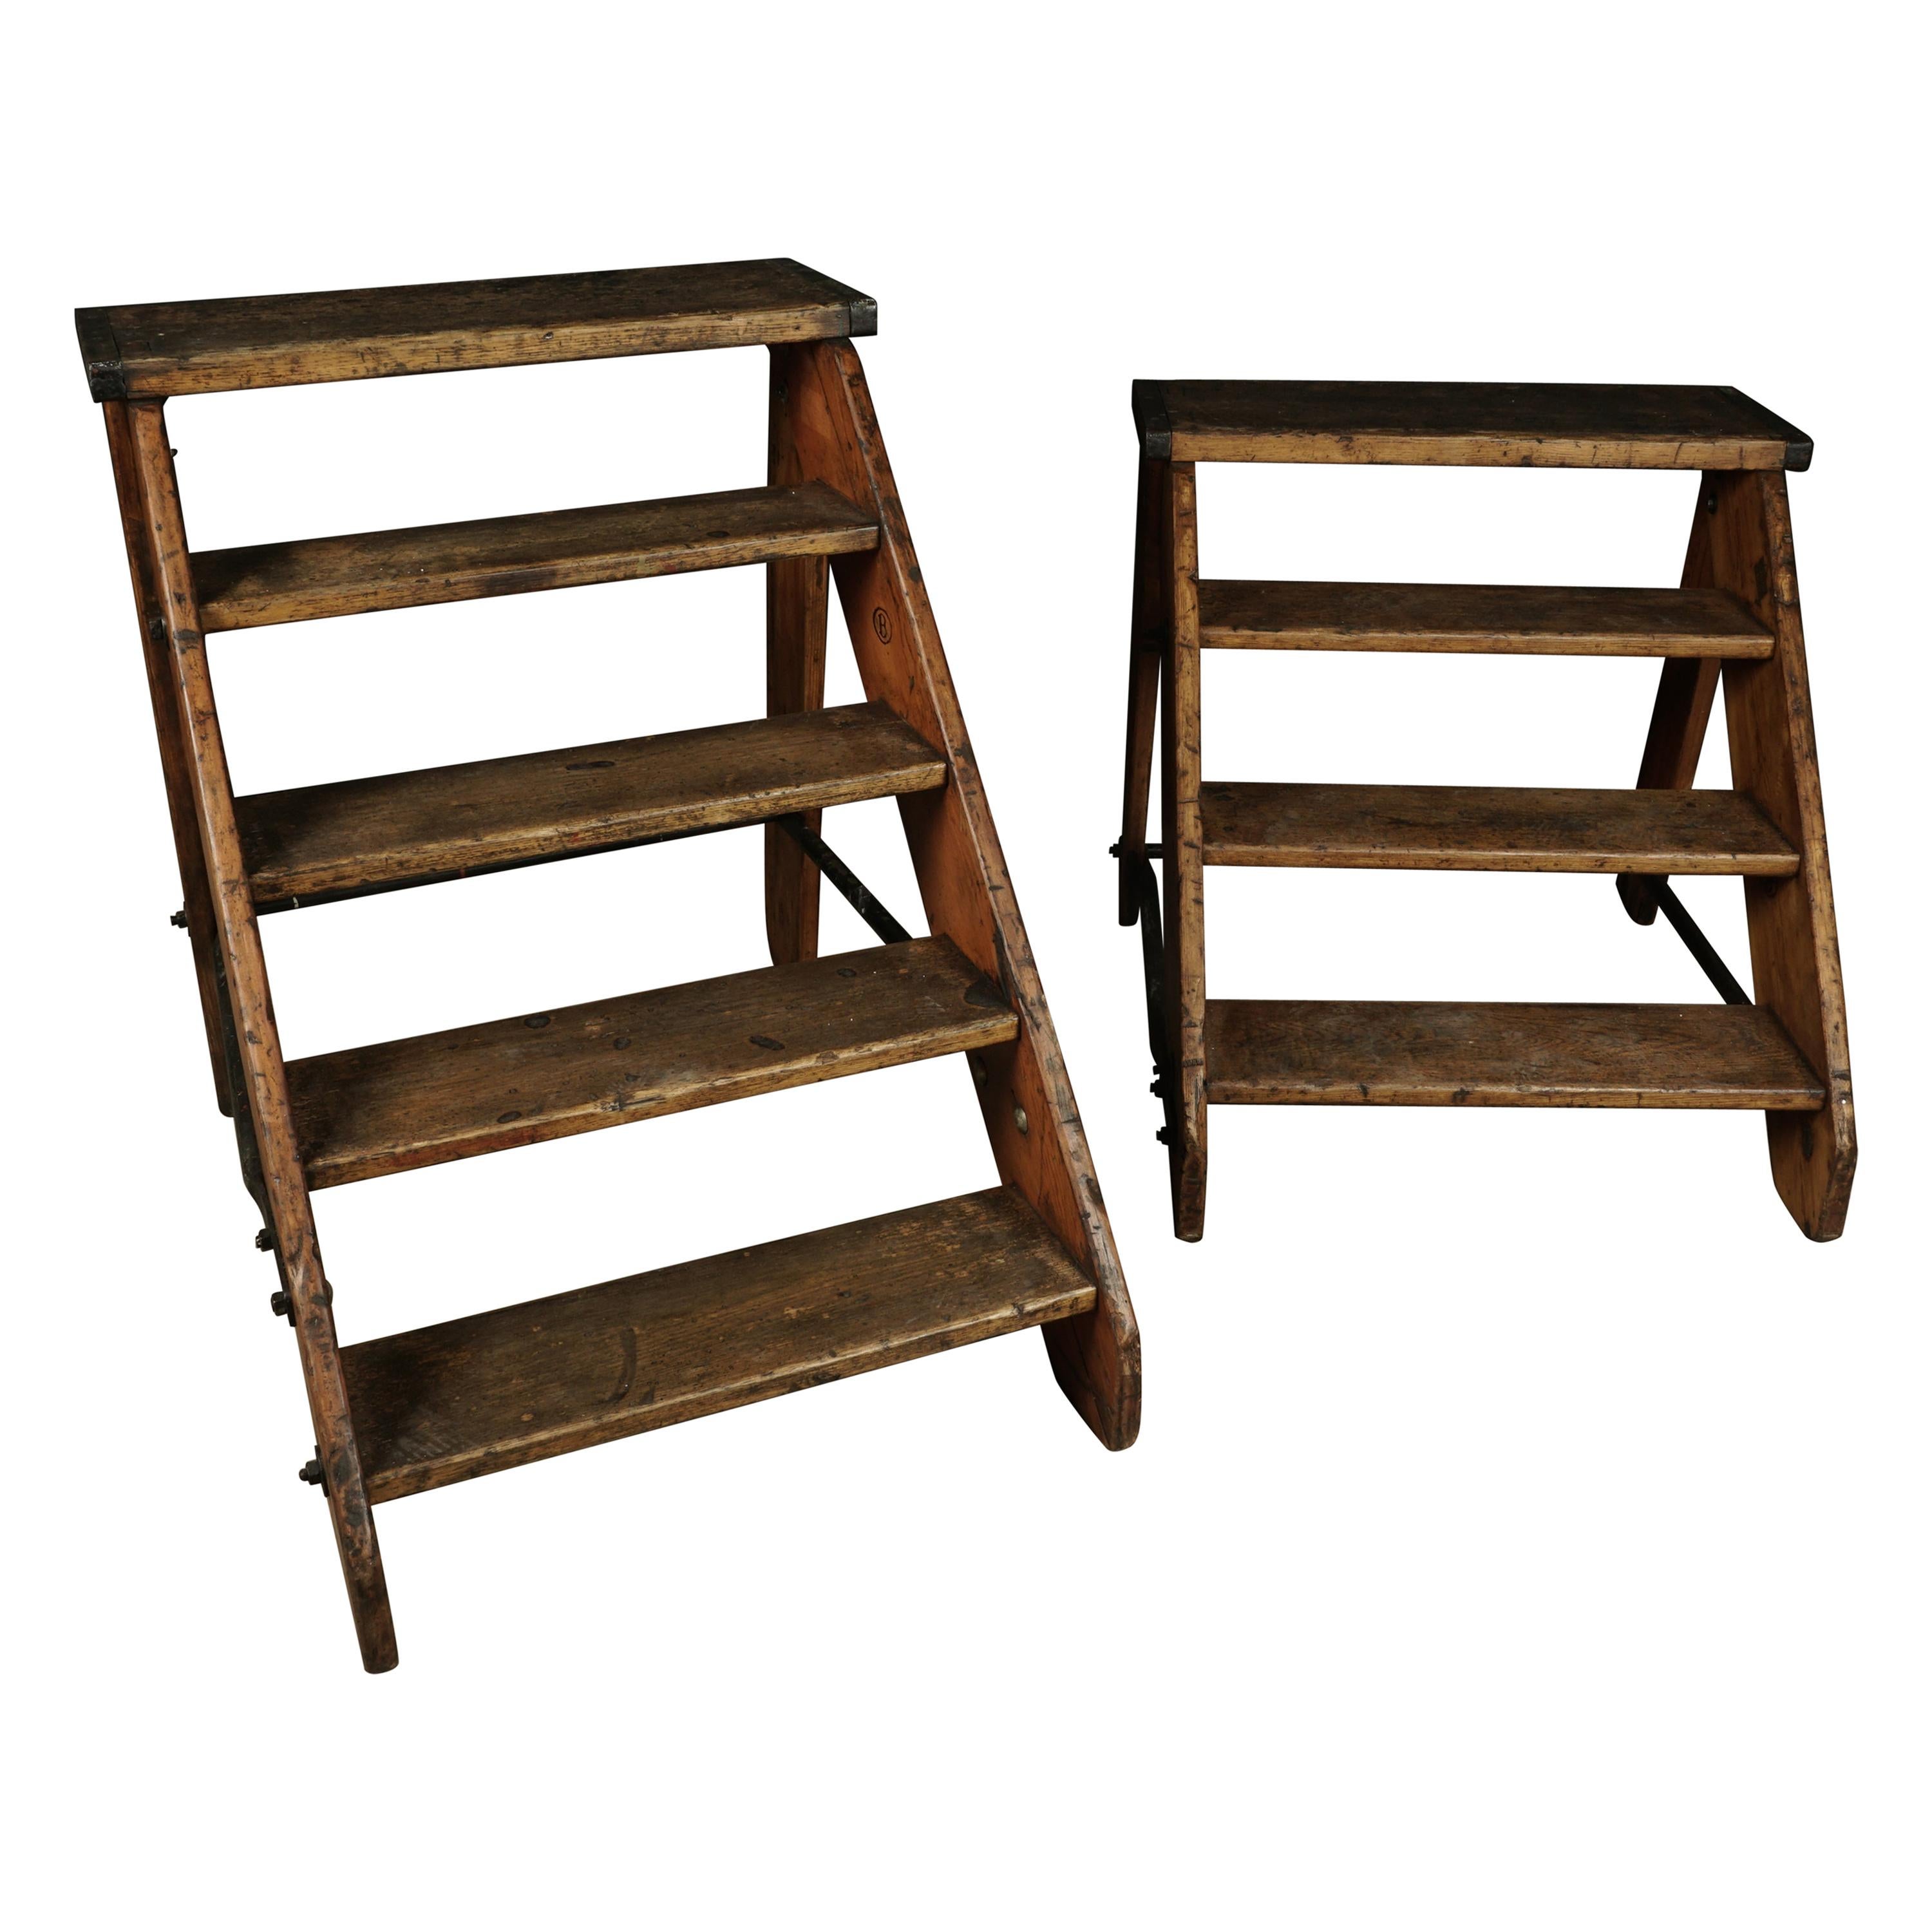 Set of Two Vintage Step Ladders from Belgium, circa 1940